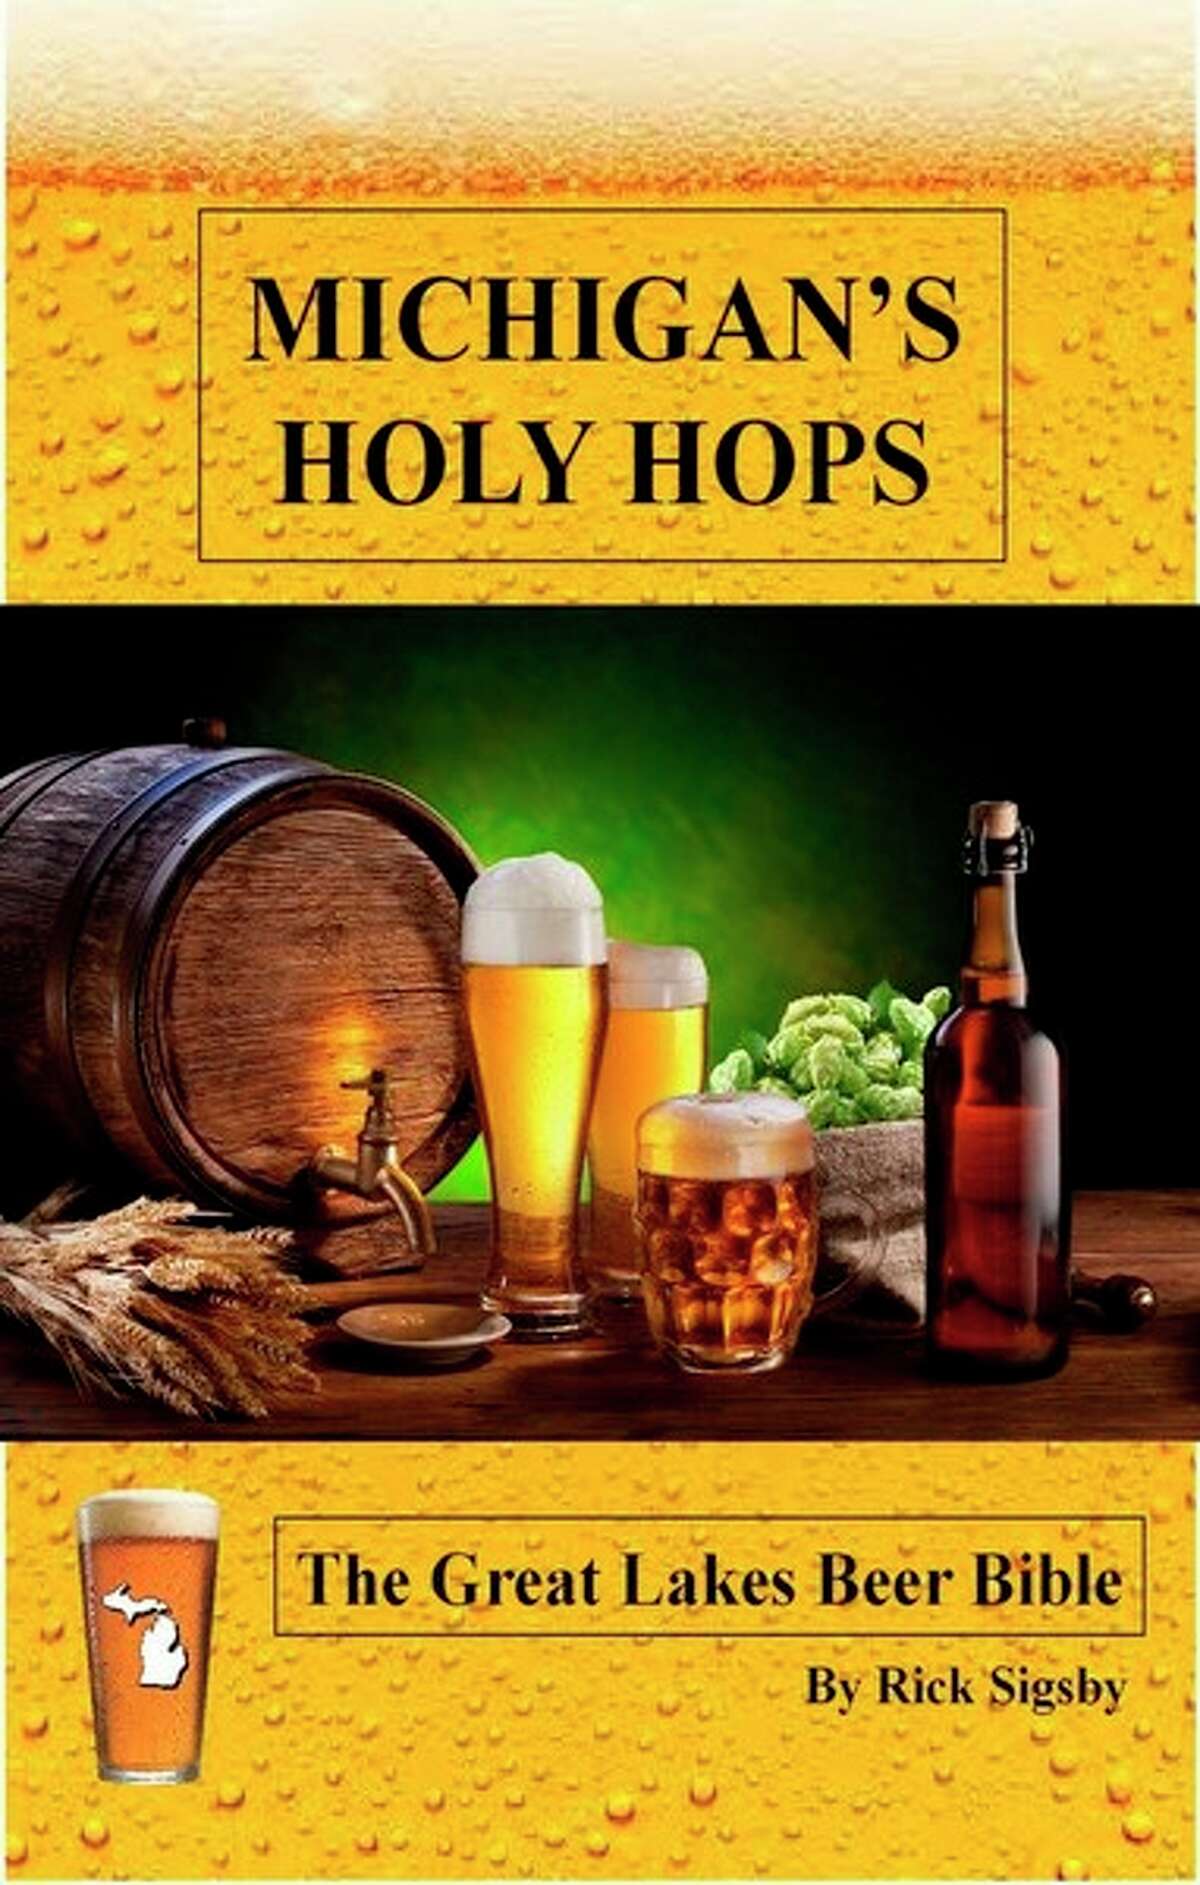 The cover of Rick Sigsby's 'Michigan's Holy Hops: The Great Lakes Beer Bible.'